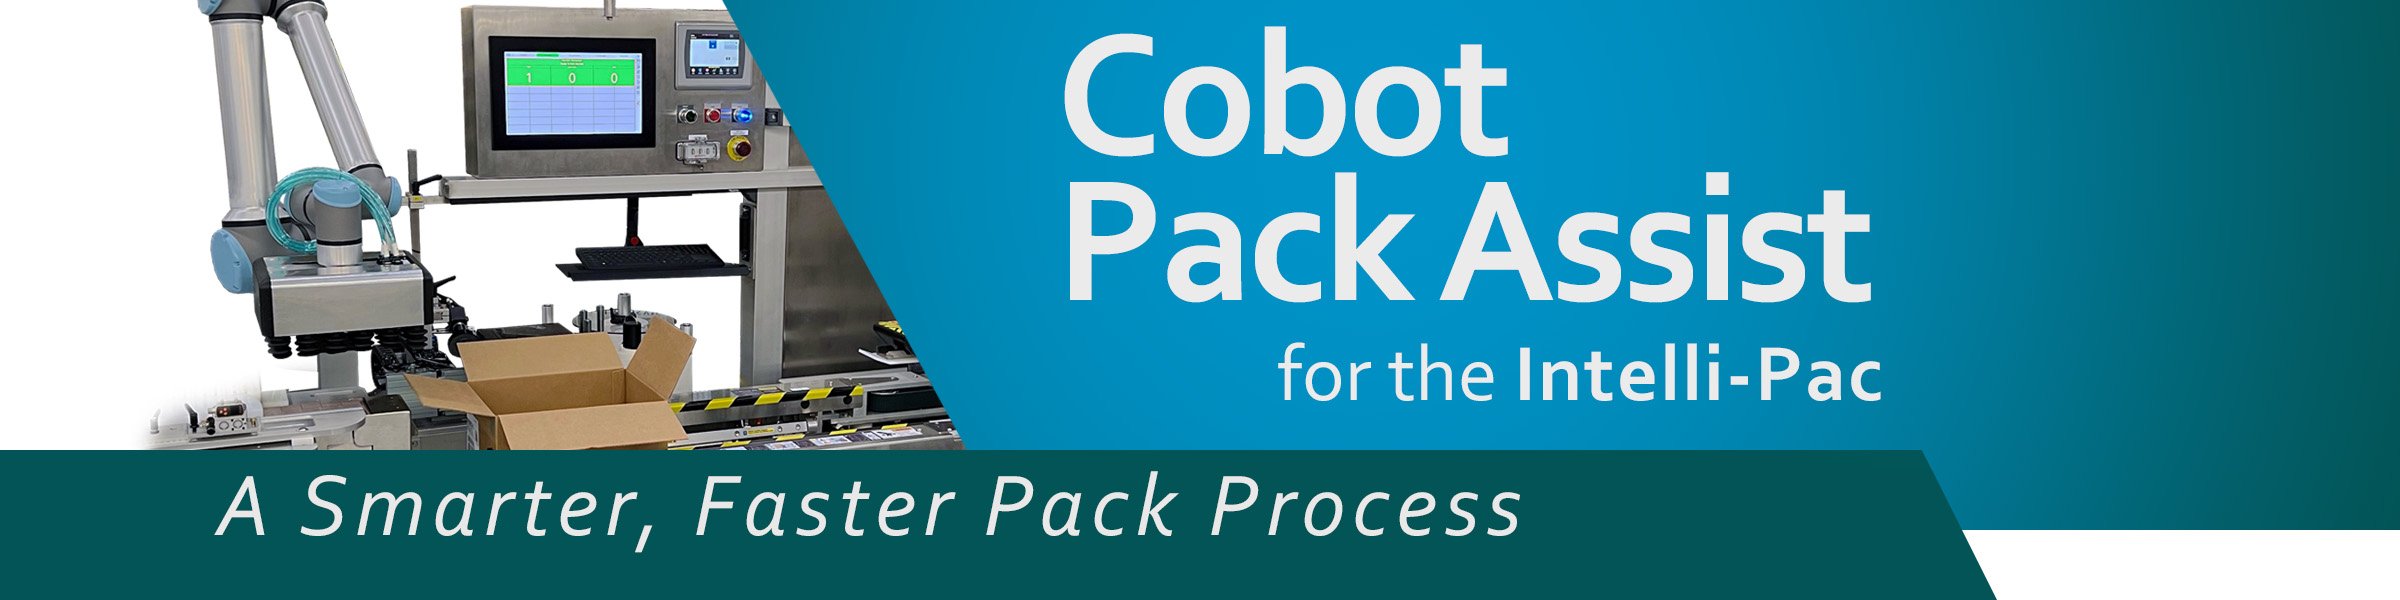 Cobot Pack Assist for Intelli-Pac